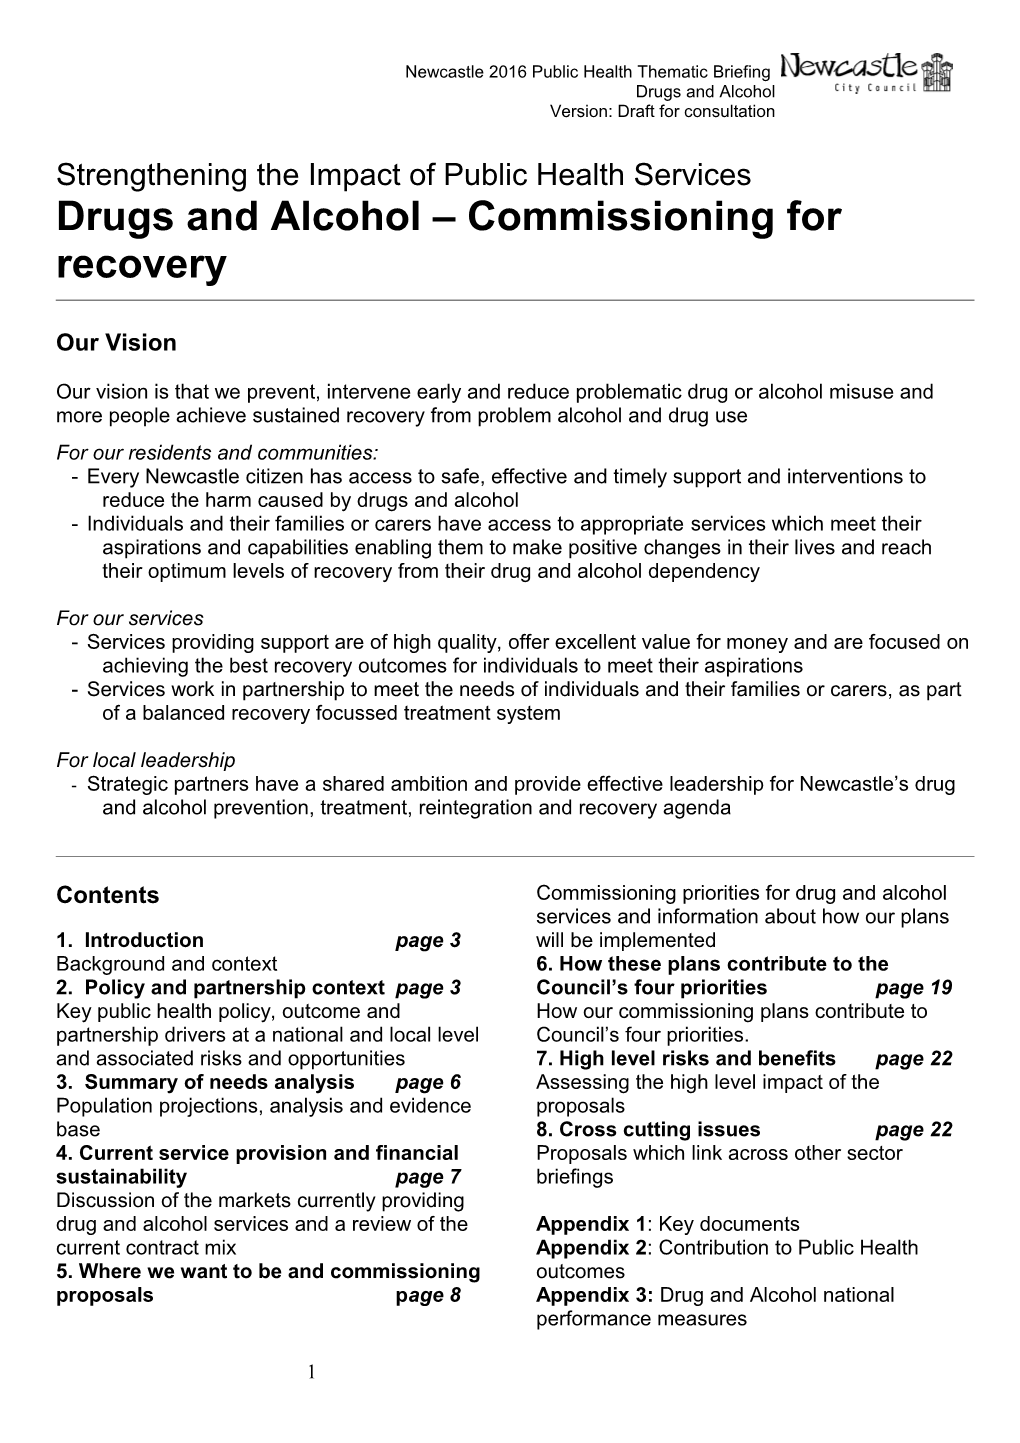 Drugs and Alcohol Commissioning for Recovery